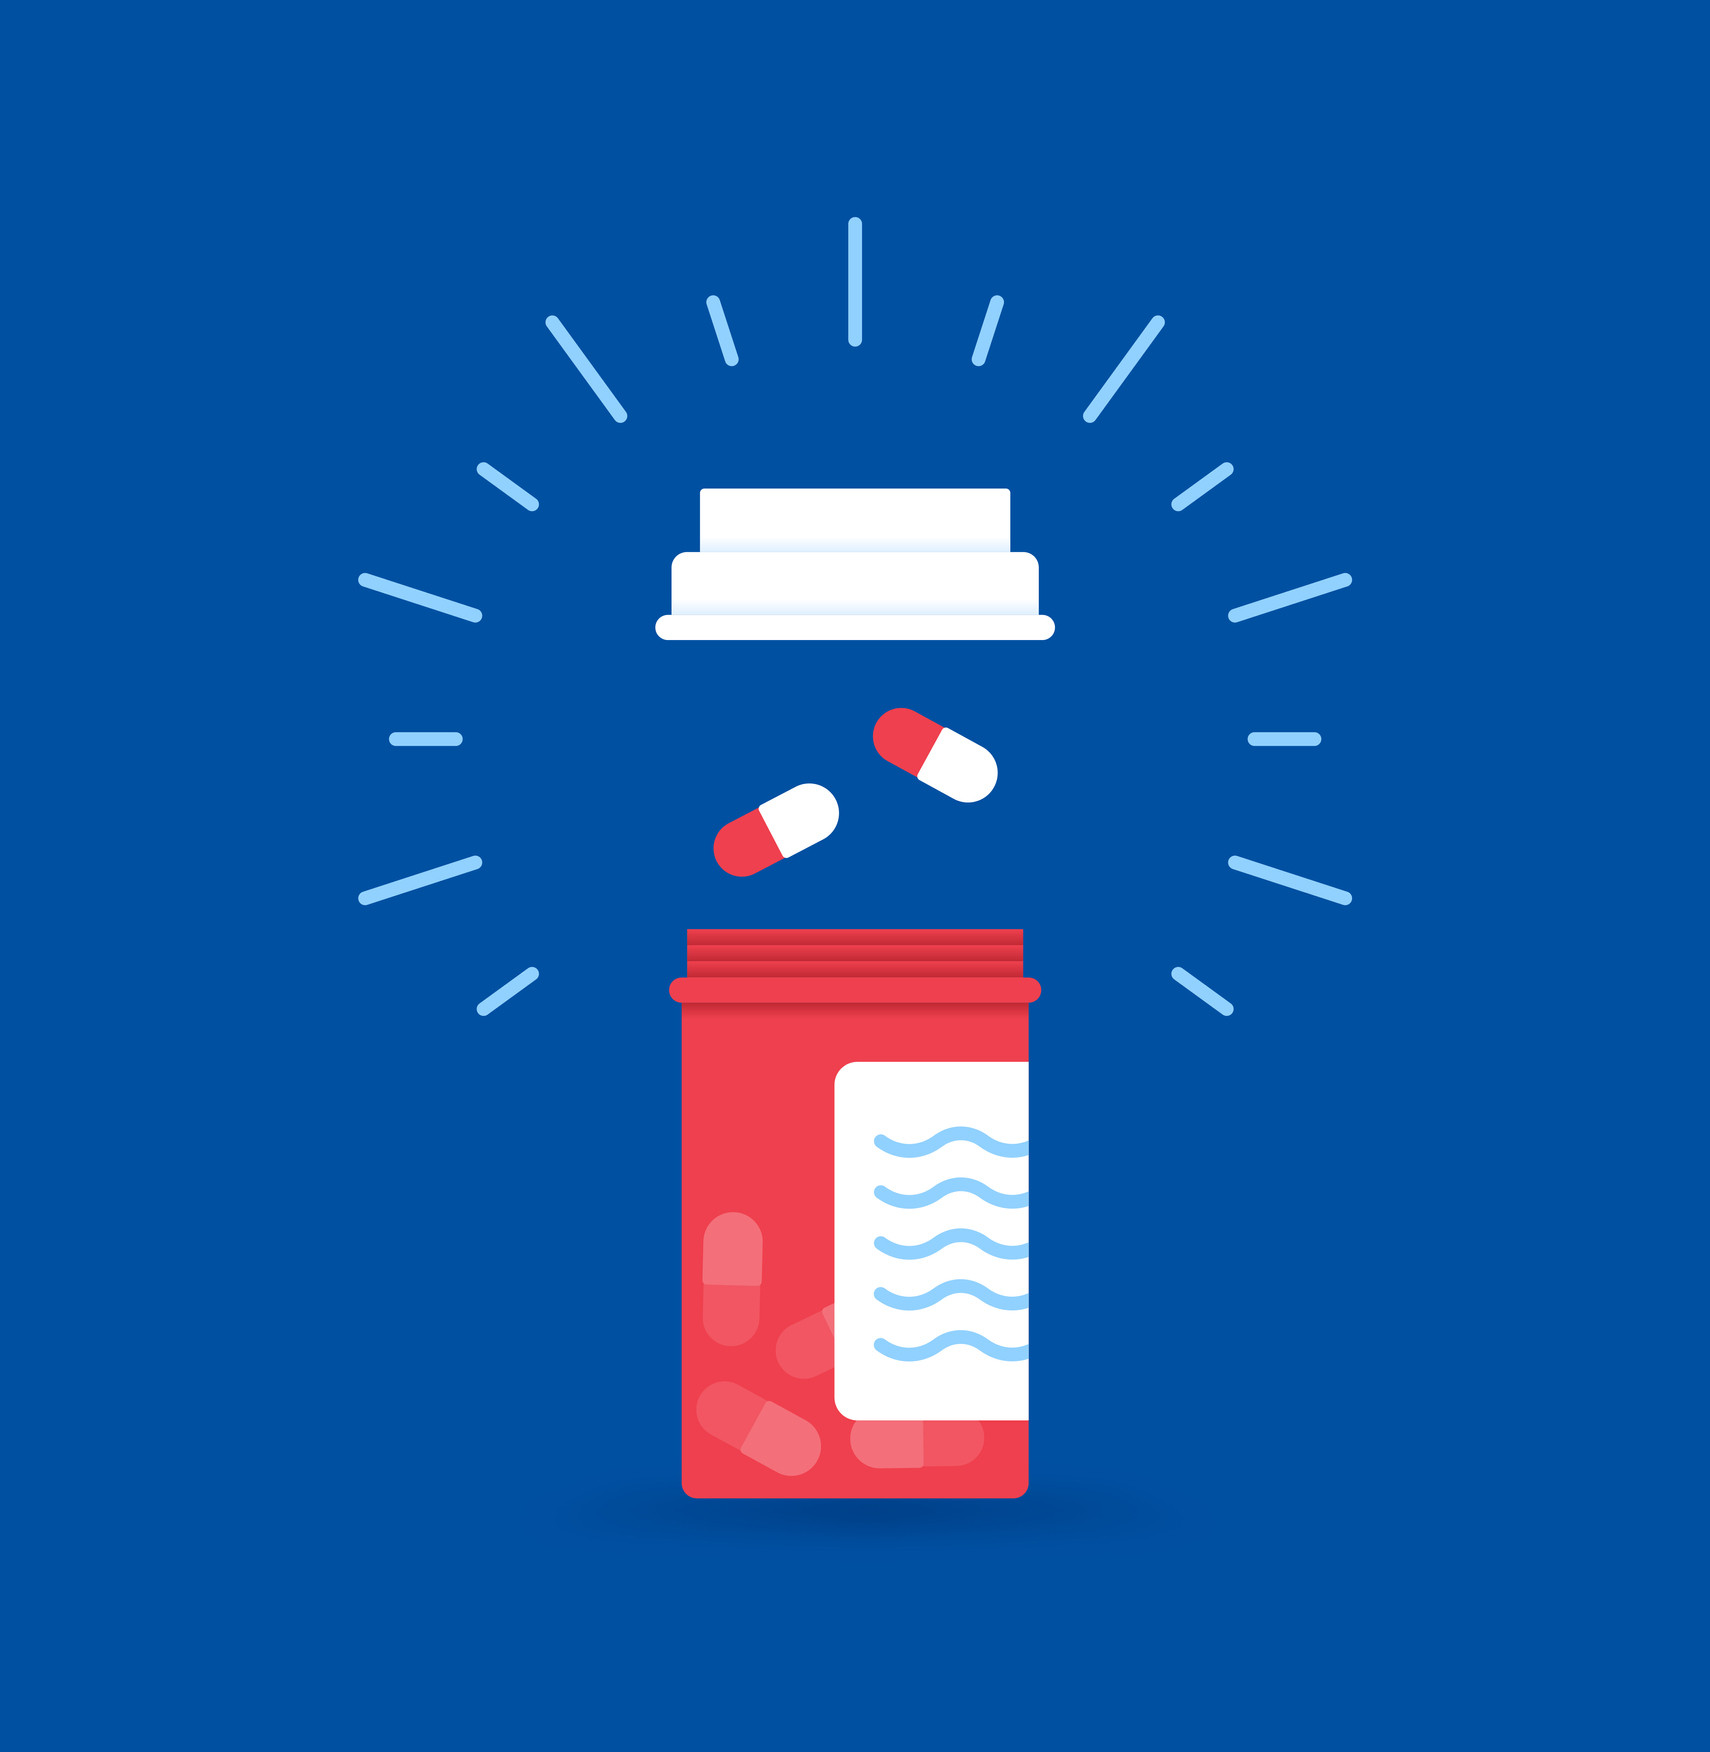 Graphic of a medicine bottle with top off showing two pills and halo